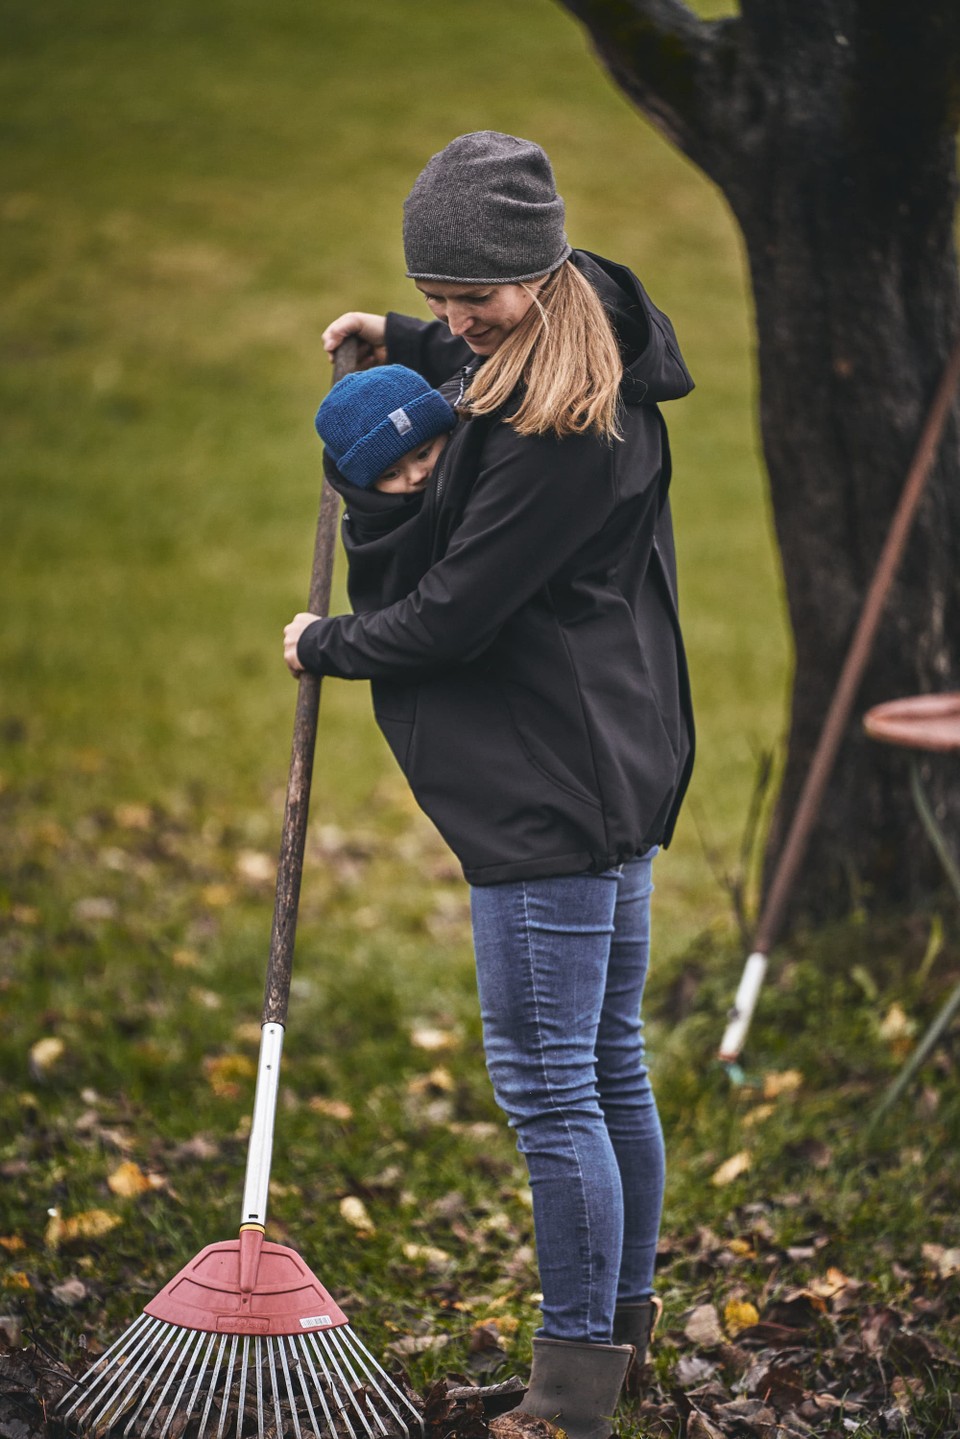 A woman with blonde hair wearing a grey beanie hat with her baby in a Mamalila Allrounder Babywearing jacket with the babywearing insert carrying her baby in a sling who is wearing a blue hat, outside in the garden raking leaves.